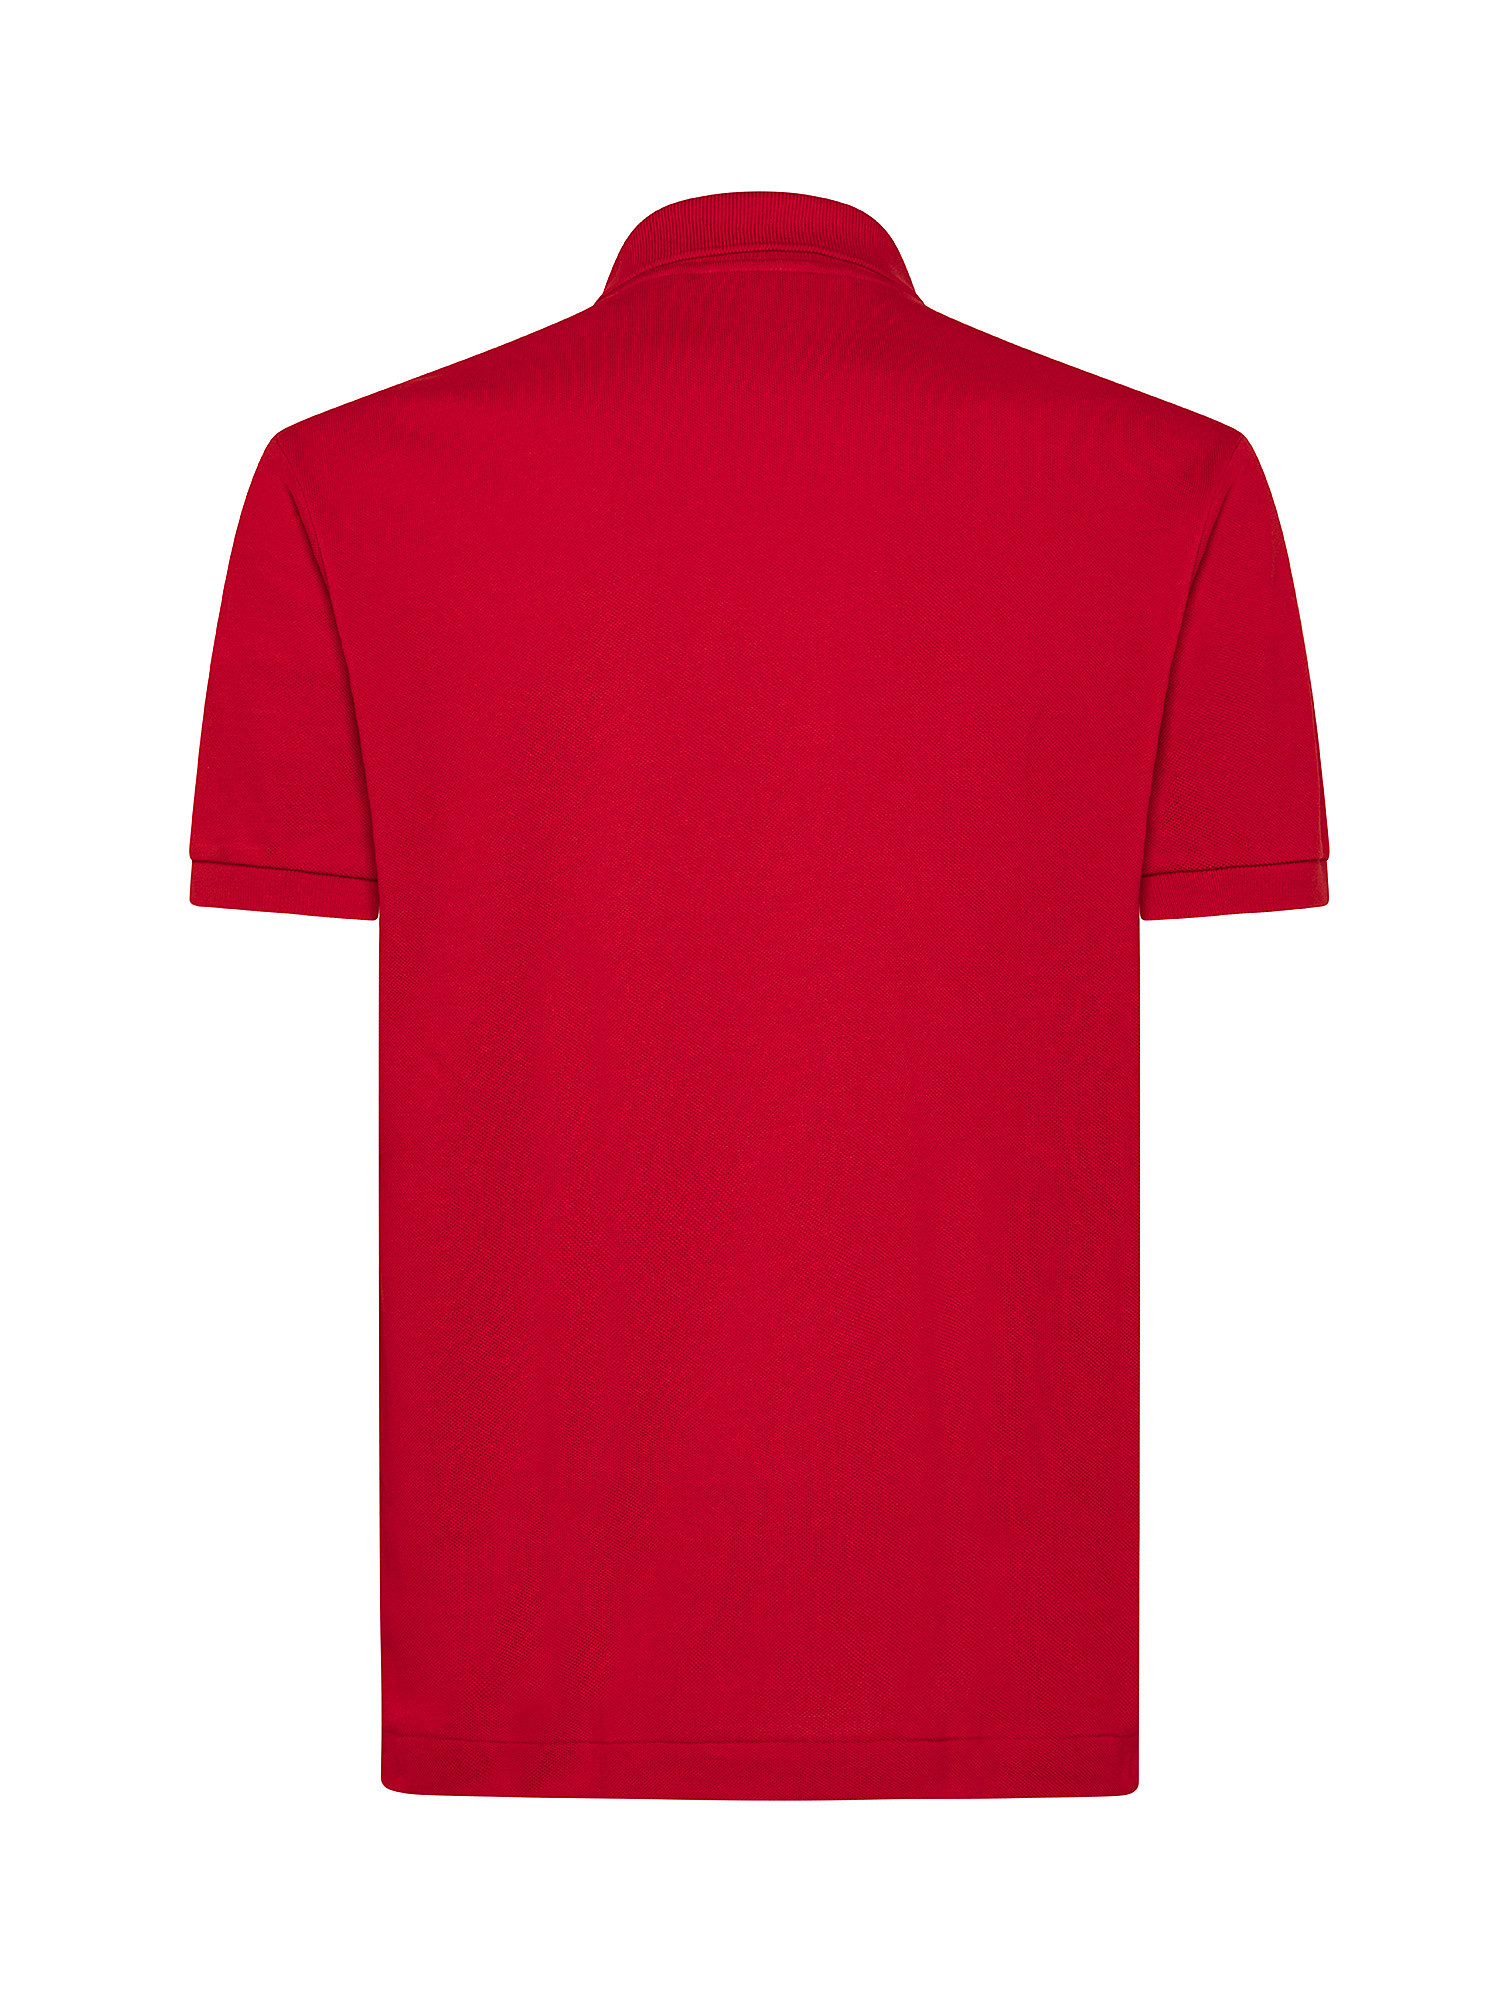 Polo, Rosso, large image number 1